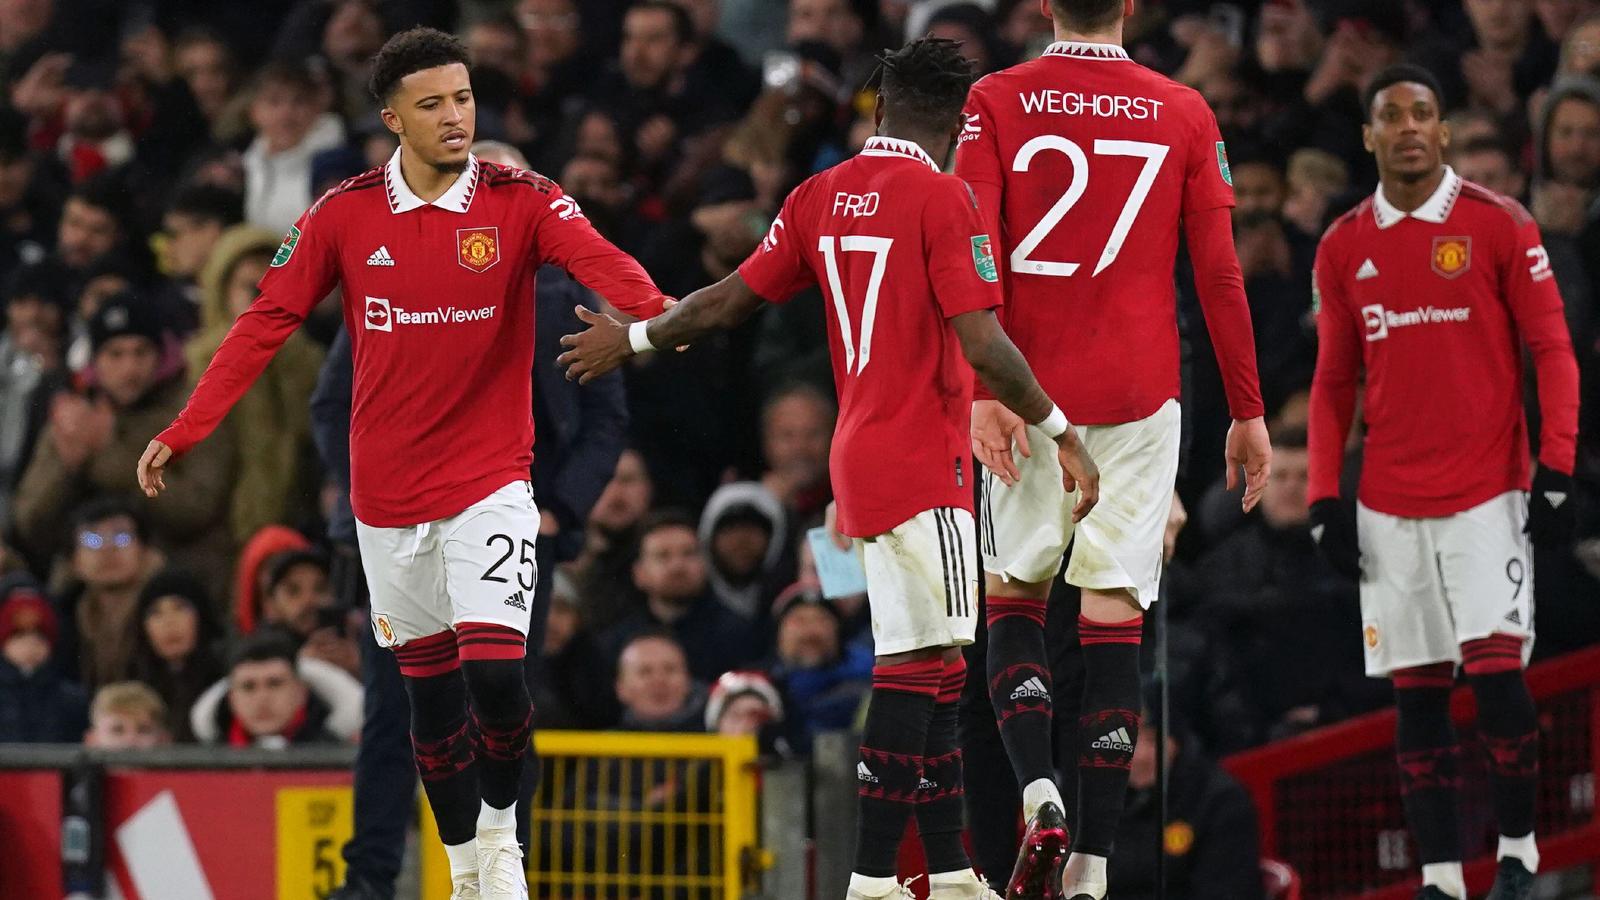 Carabao Cup: Manchester United set up Wembley final with Newcastle after breezing past Forest